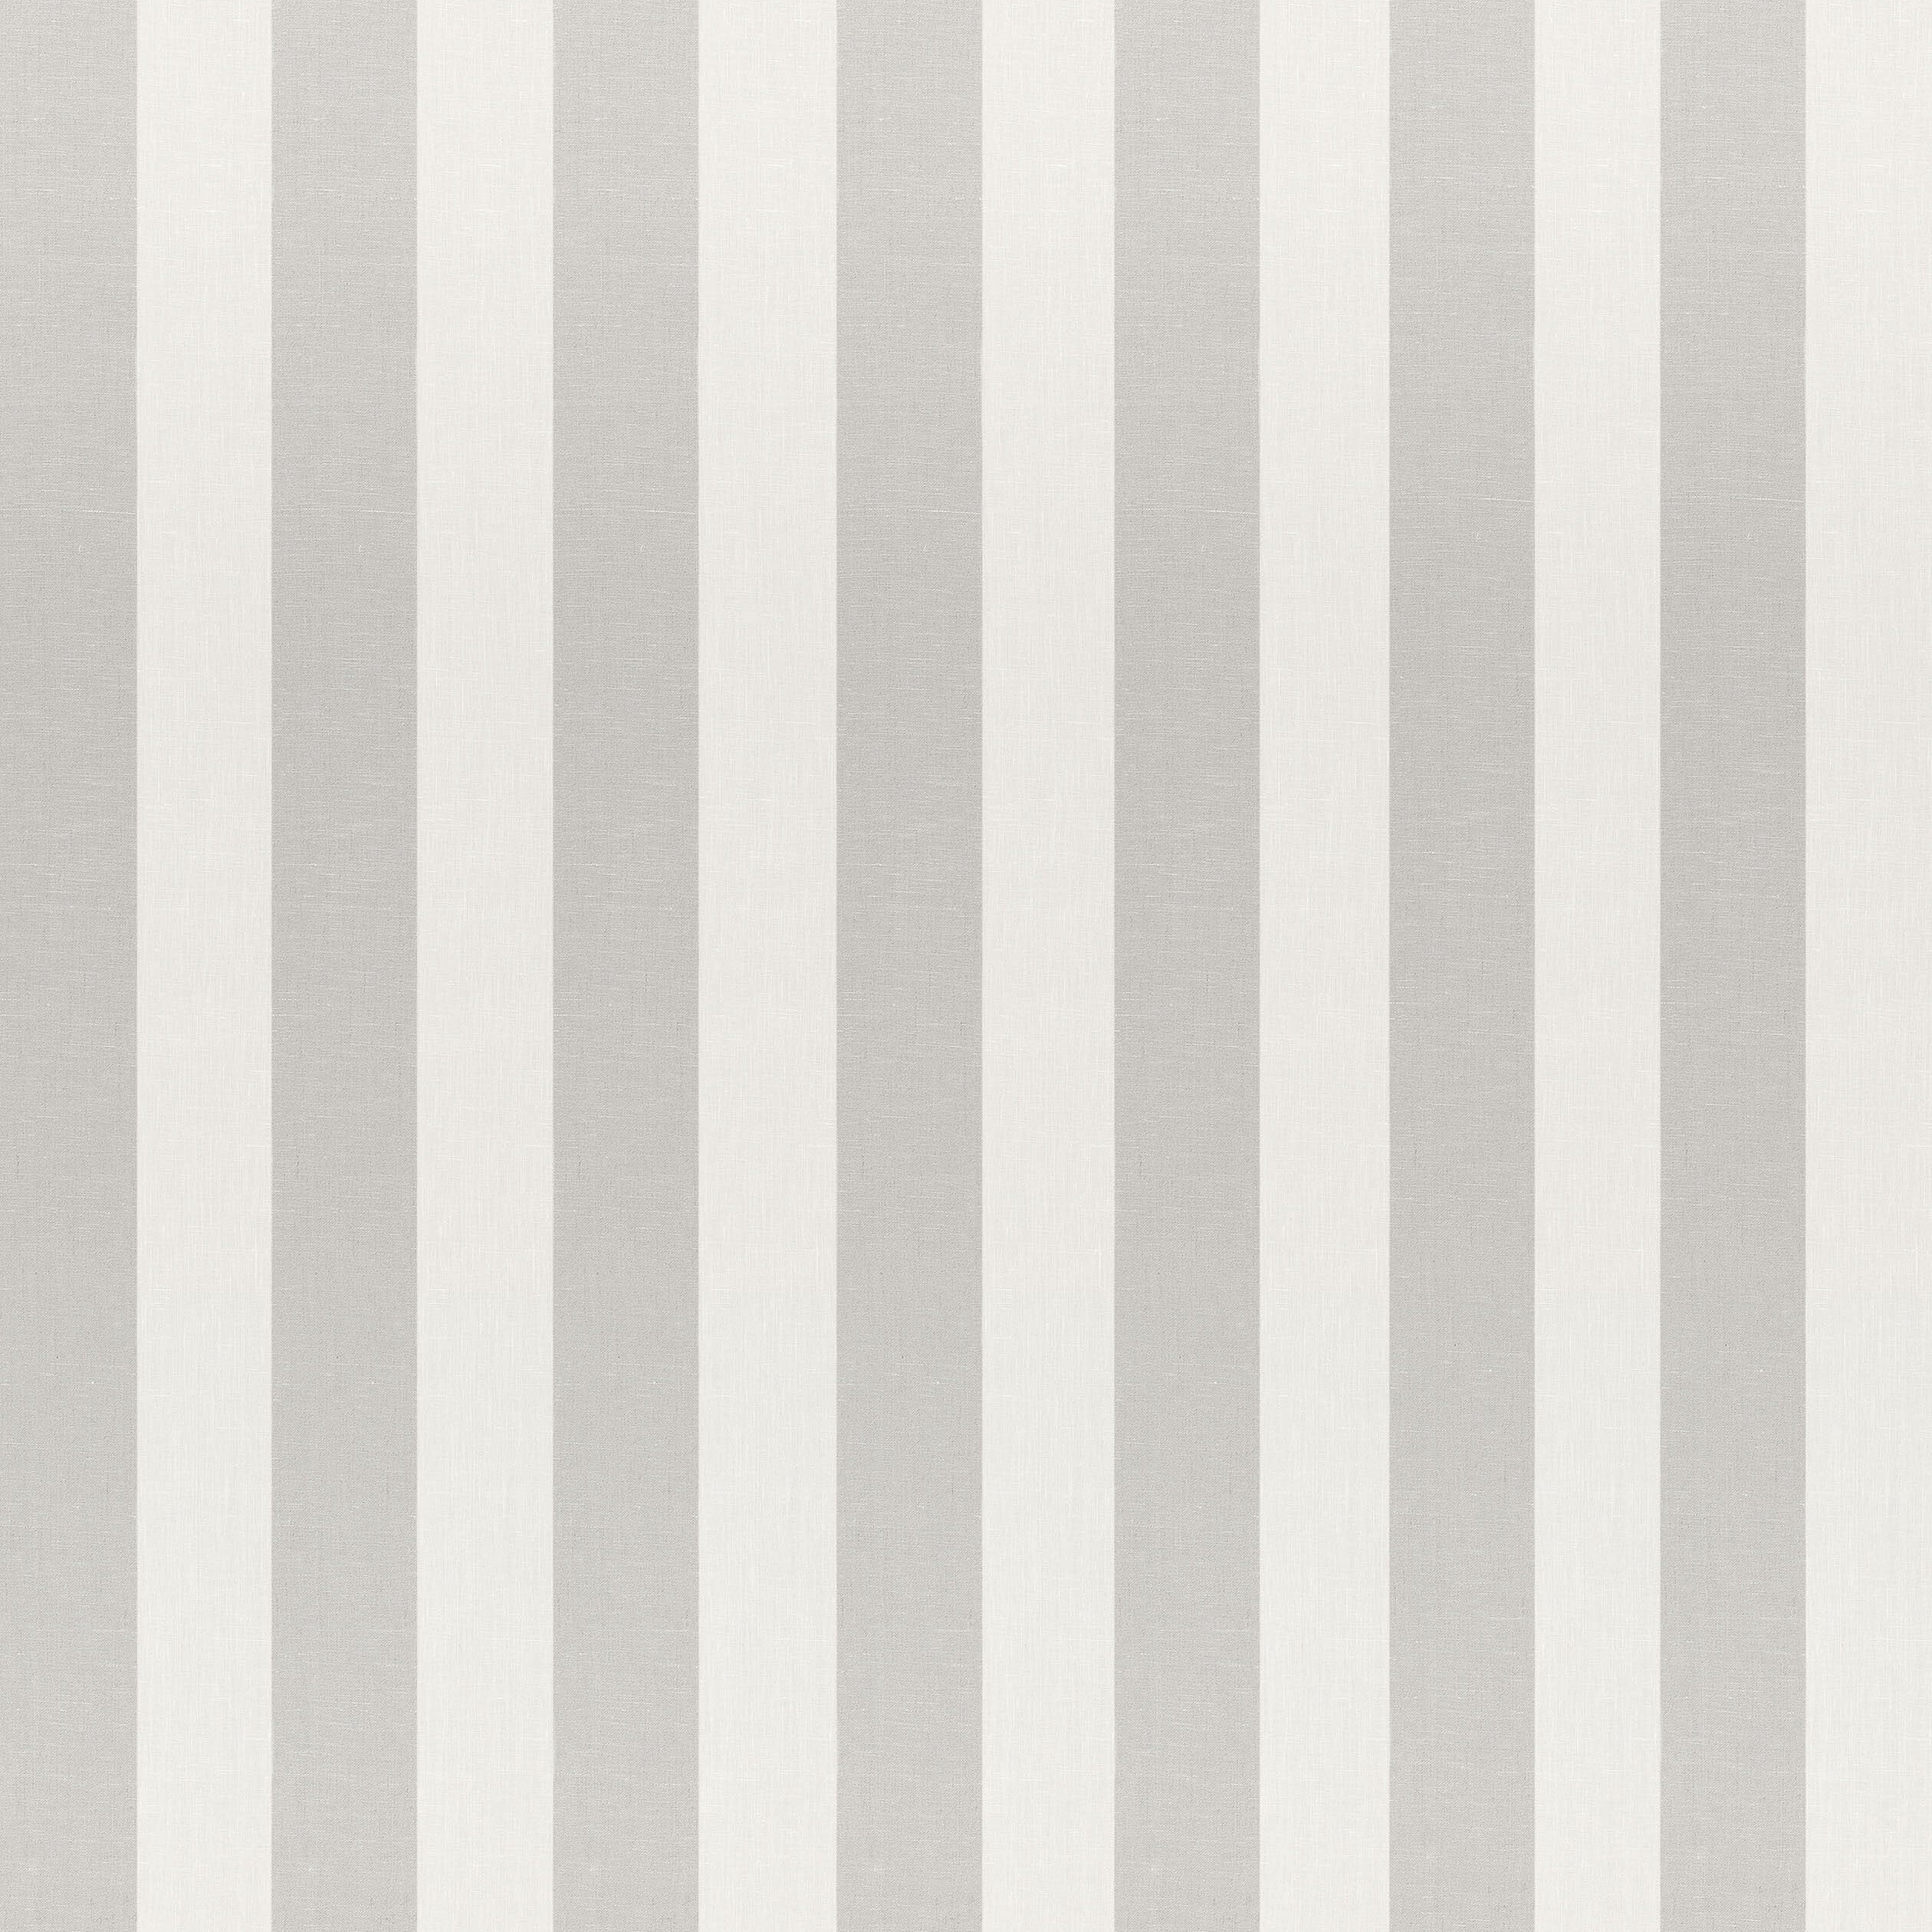 Kings Road Stripe fabric in grey color - pattern number AW9114 - by Anna French in the Natural Glimmer collection